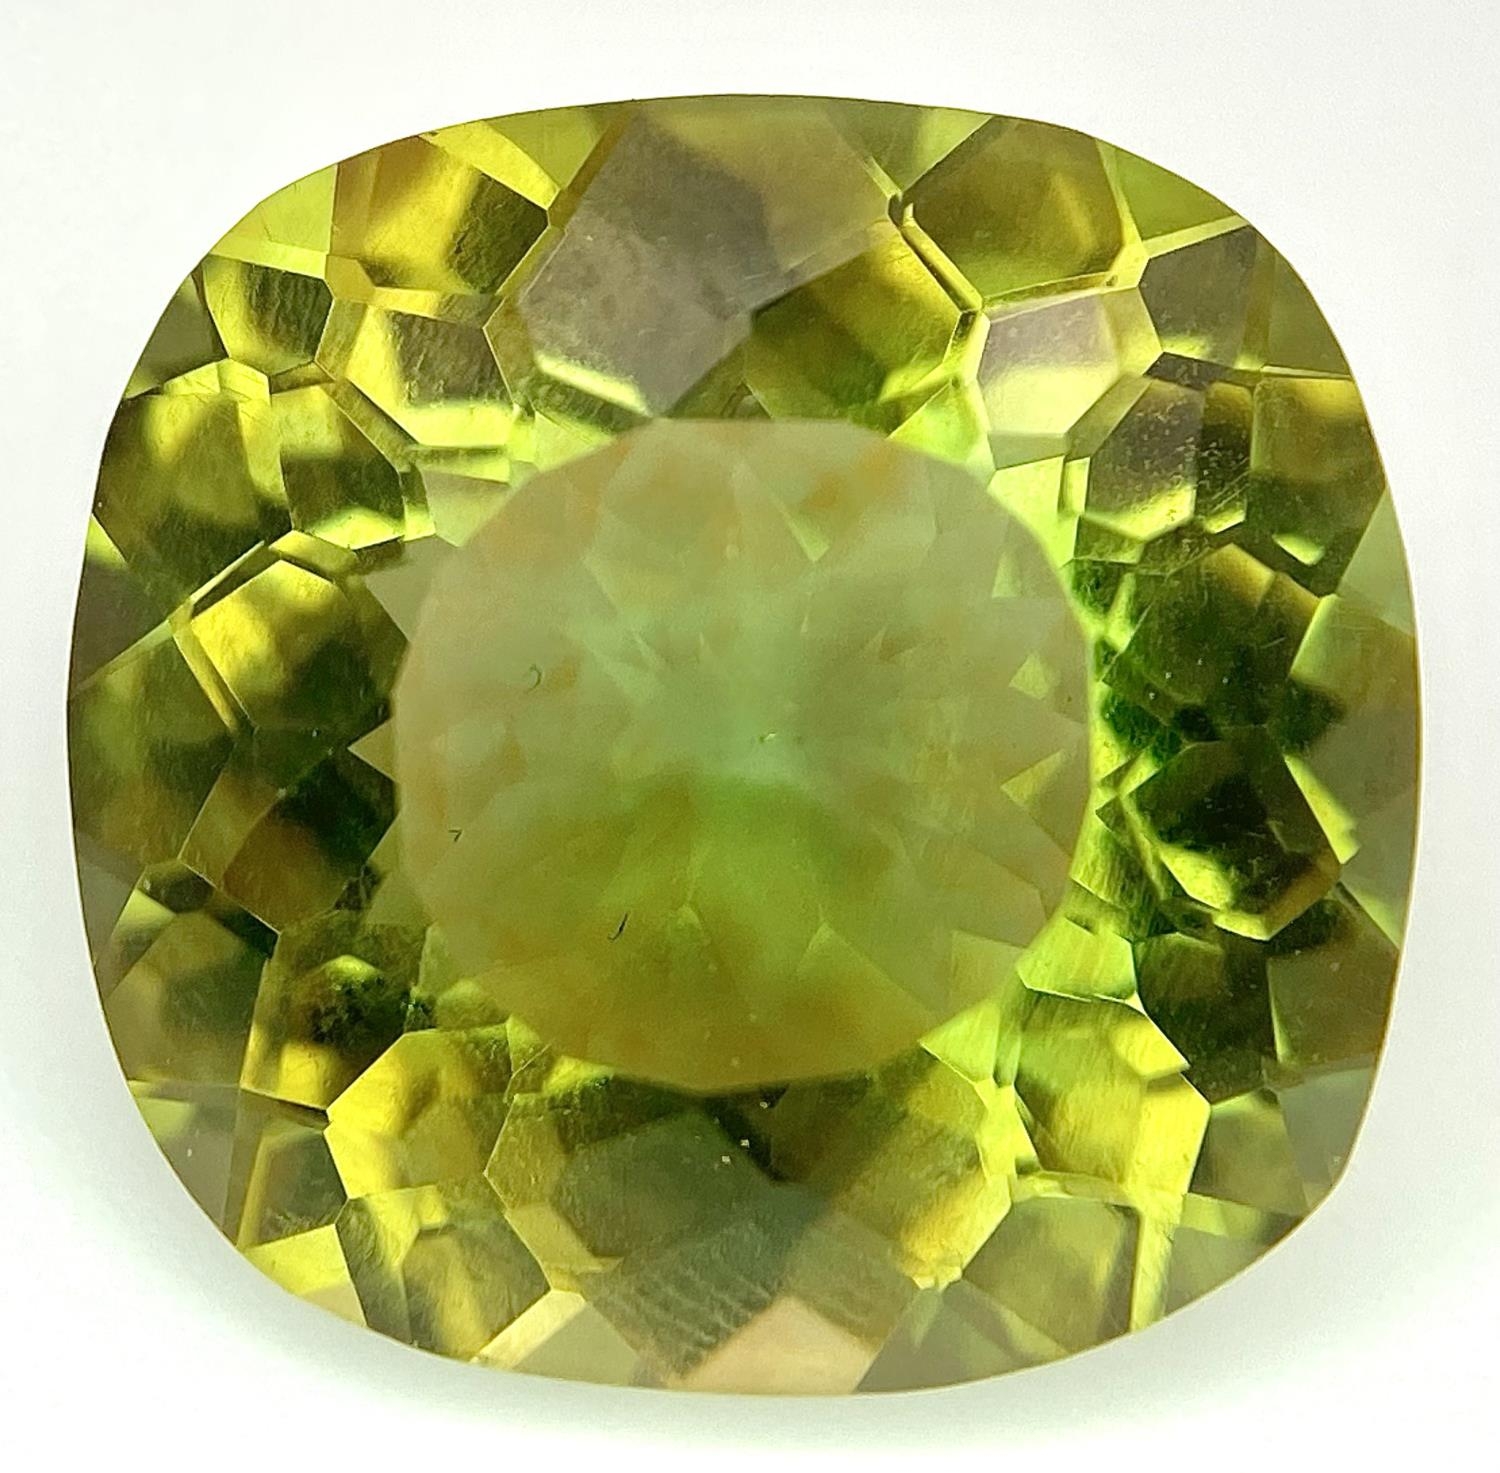 A 19ct Pale Green Prasiolite Gemstone. Cushion cut. No visible marks or inclusions. No certificate